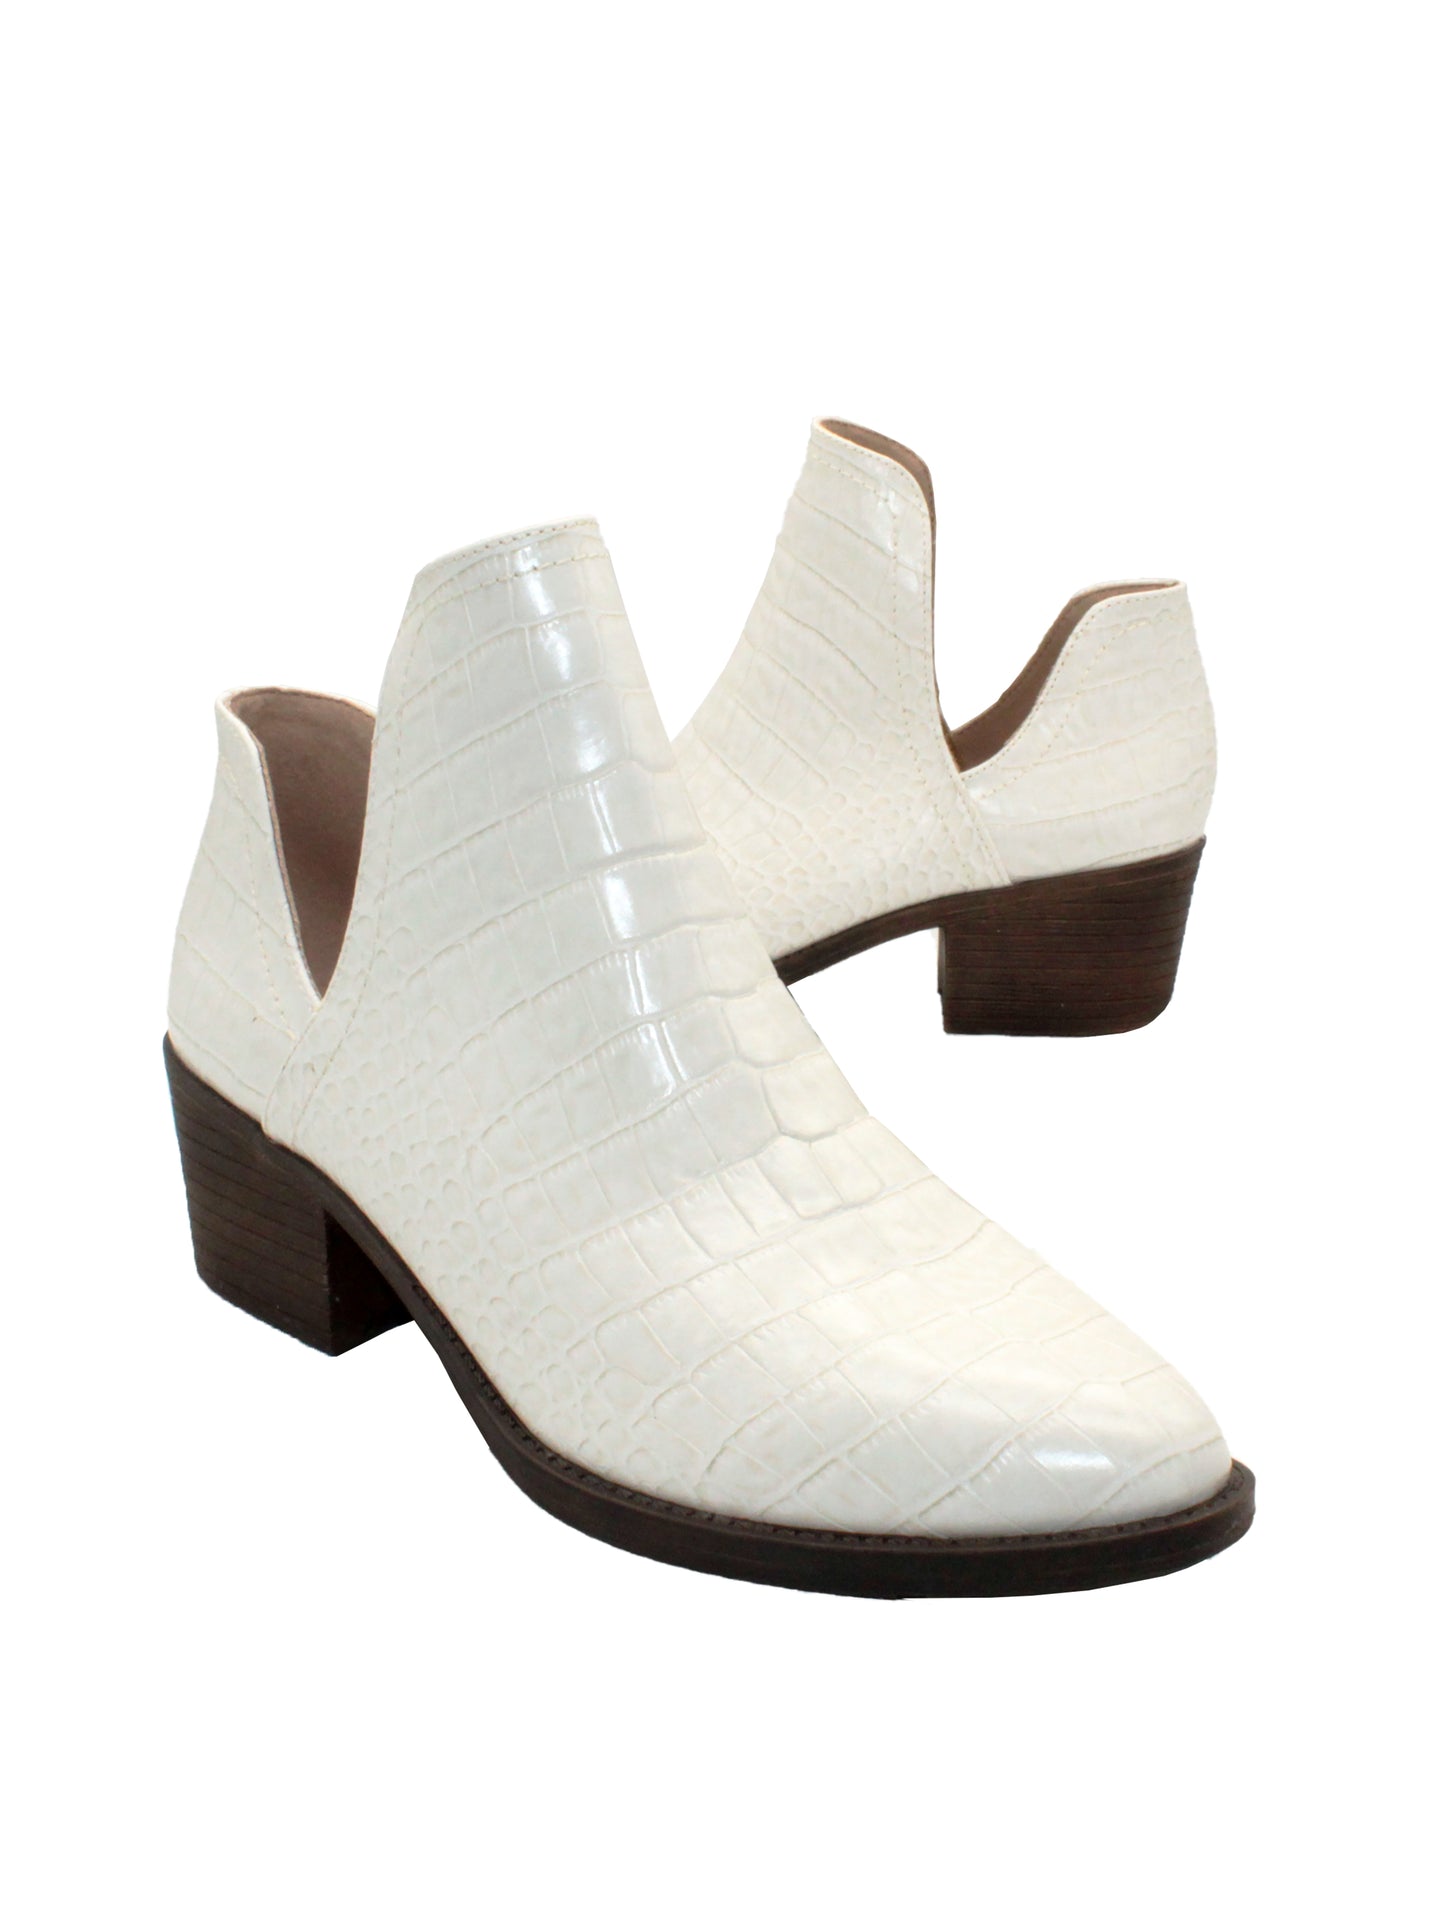 Our fan favorite bone croco CHRONICLE bootie by Volatile has been crafted in exotic materials, embossed faux croco or multicolored faux snake, for the new fall season. The upper features an attractive open shank that complement dresses and jeans alike. 3/4 angle